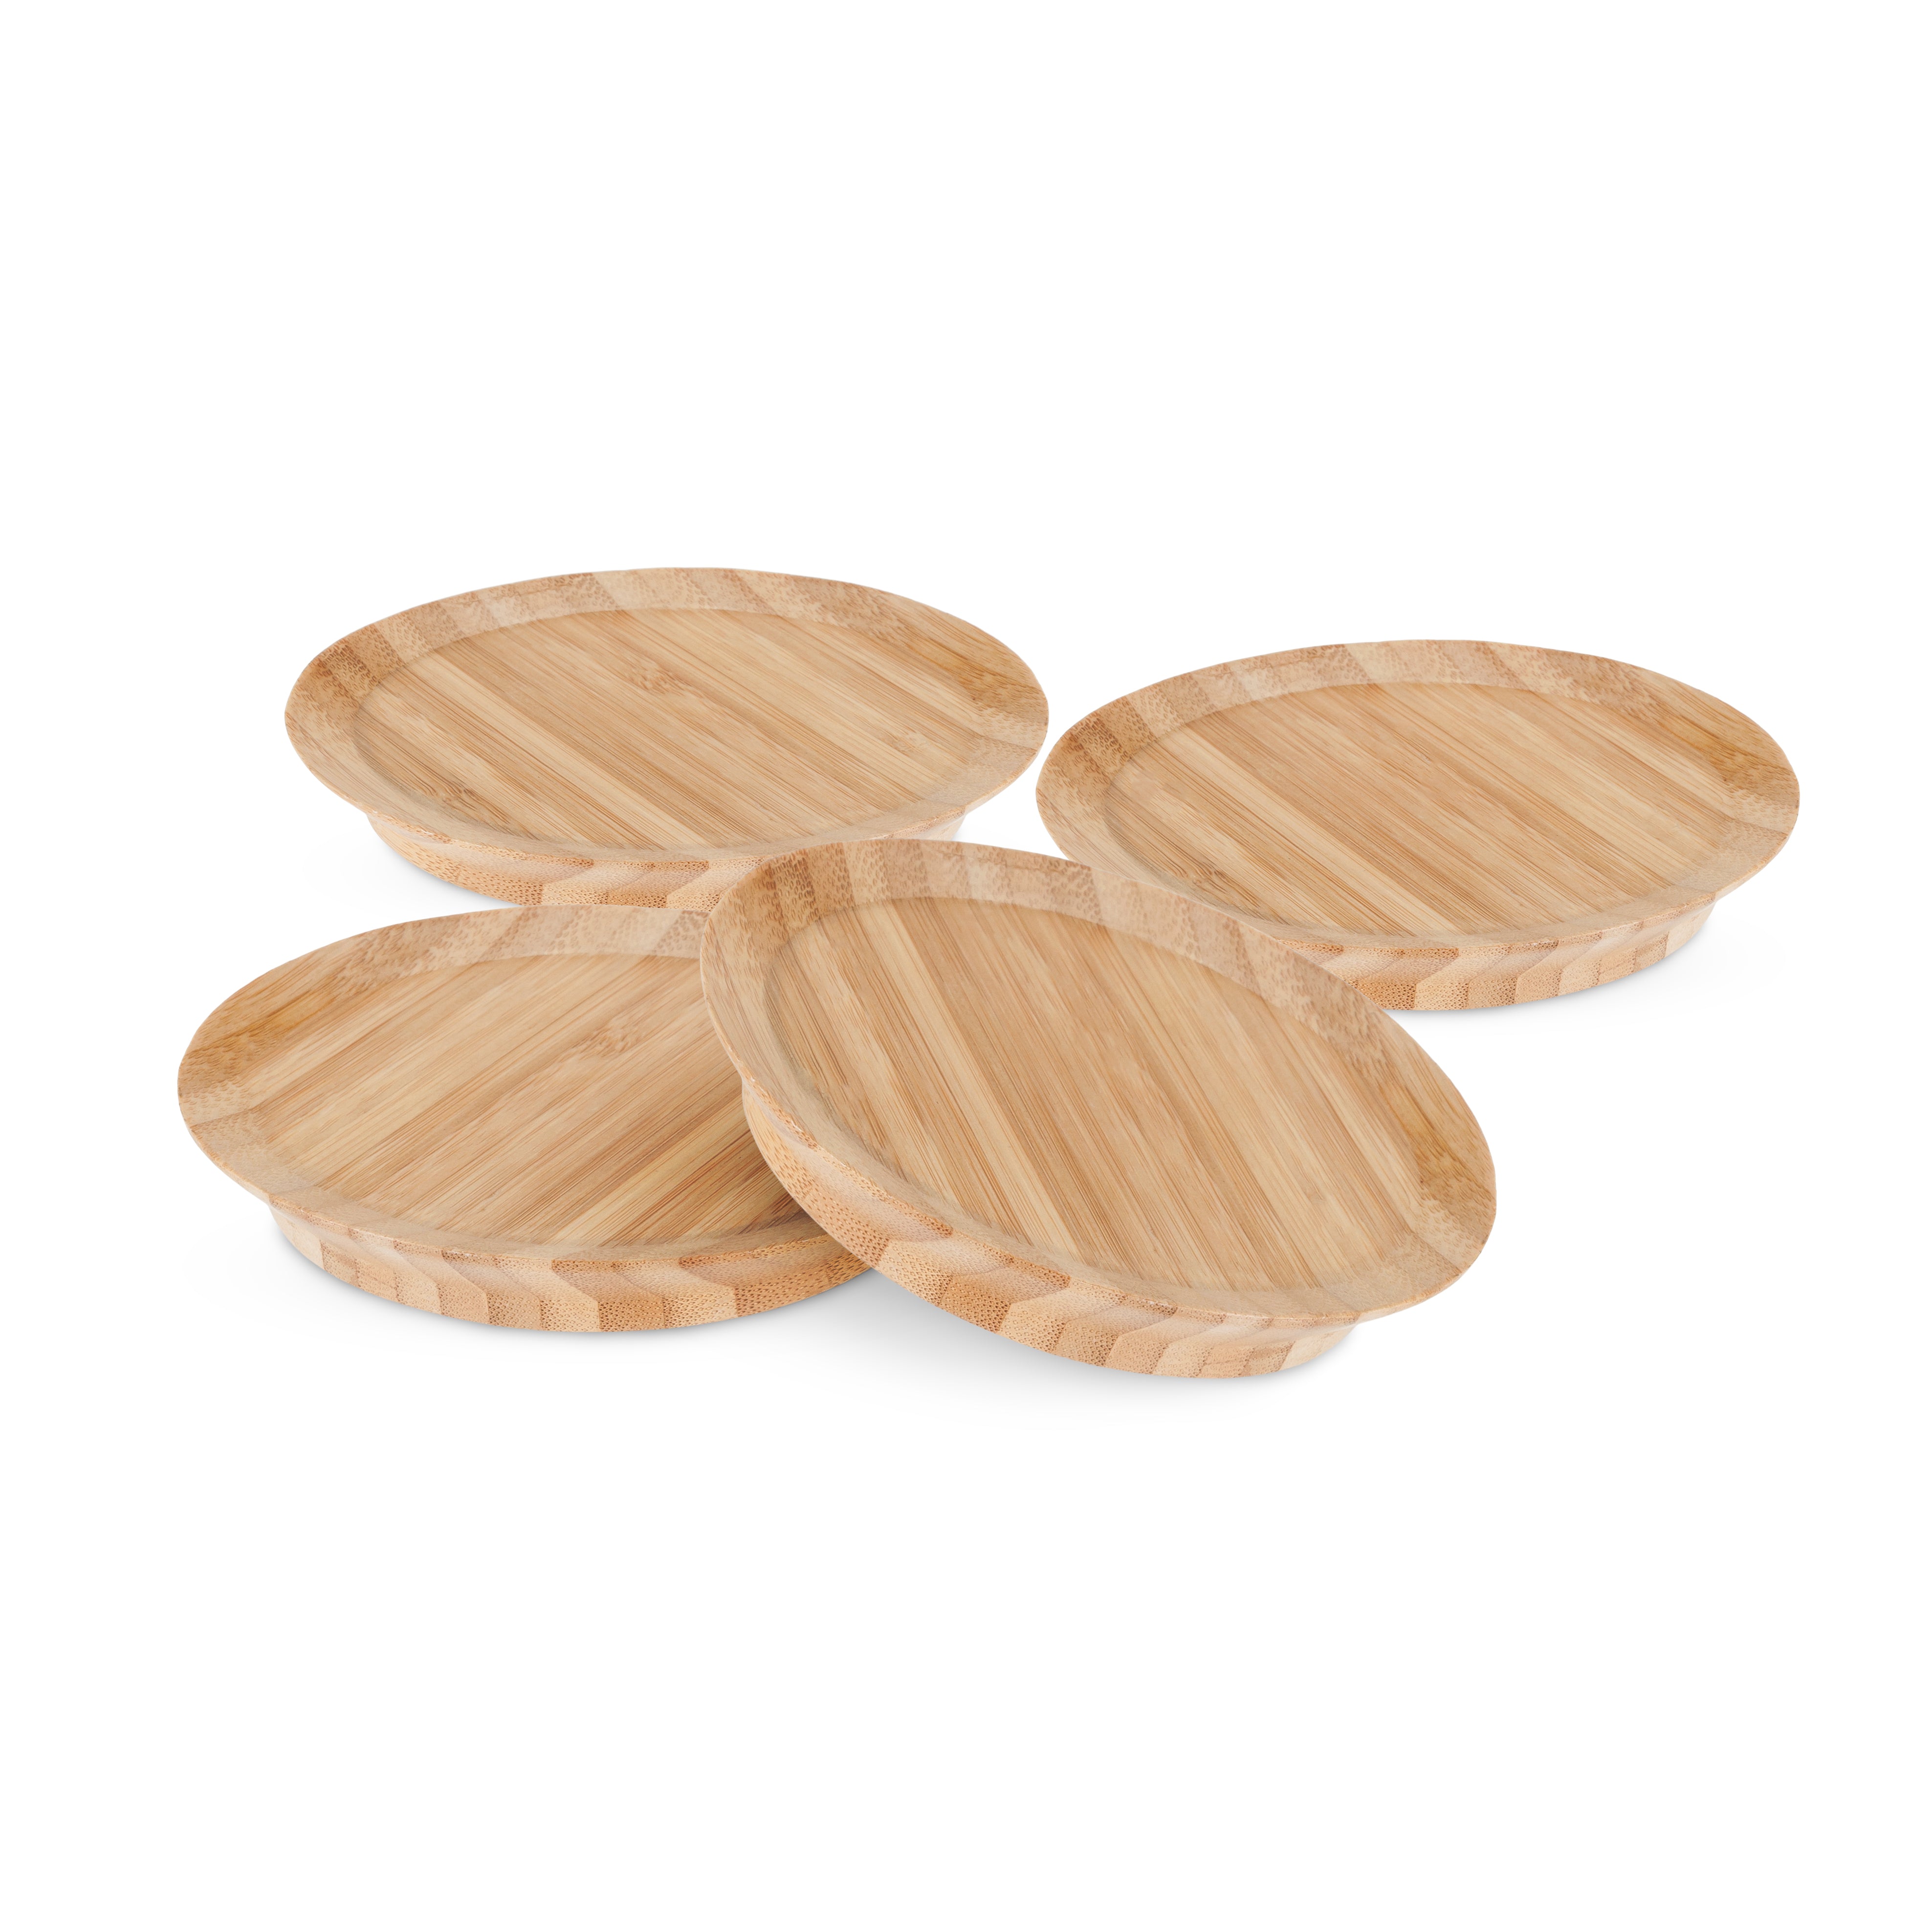 Topper Bamboo Appetizer Glass Toppers 